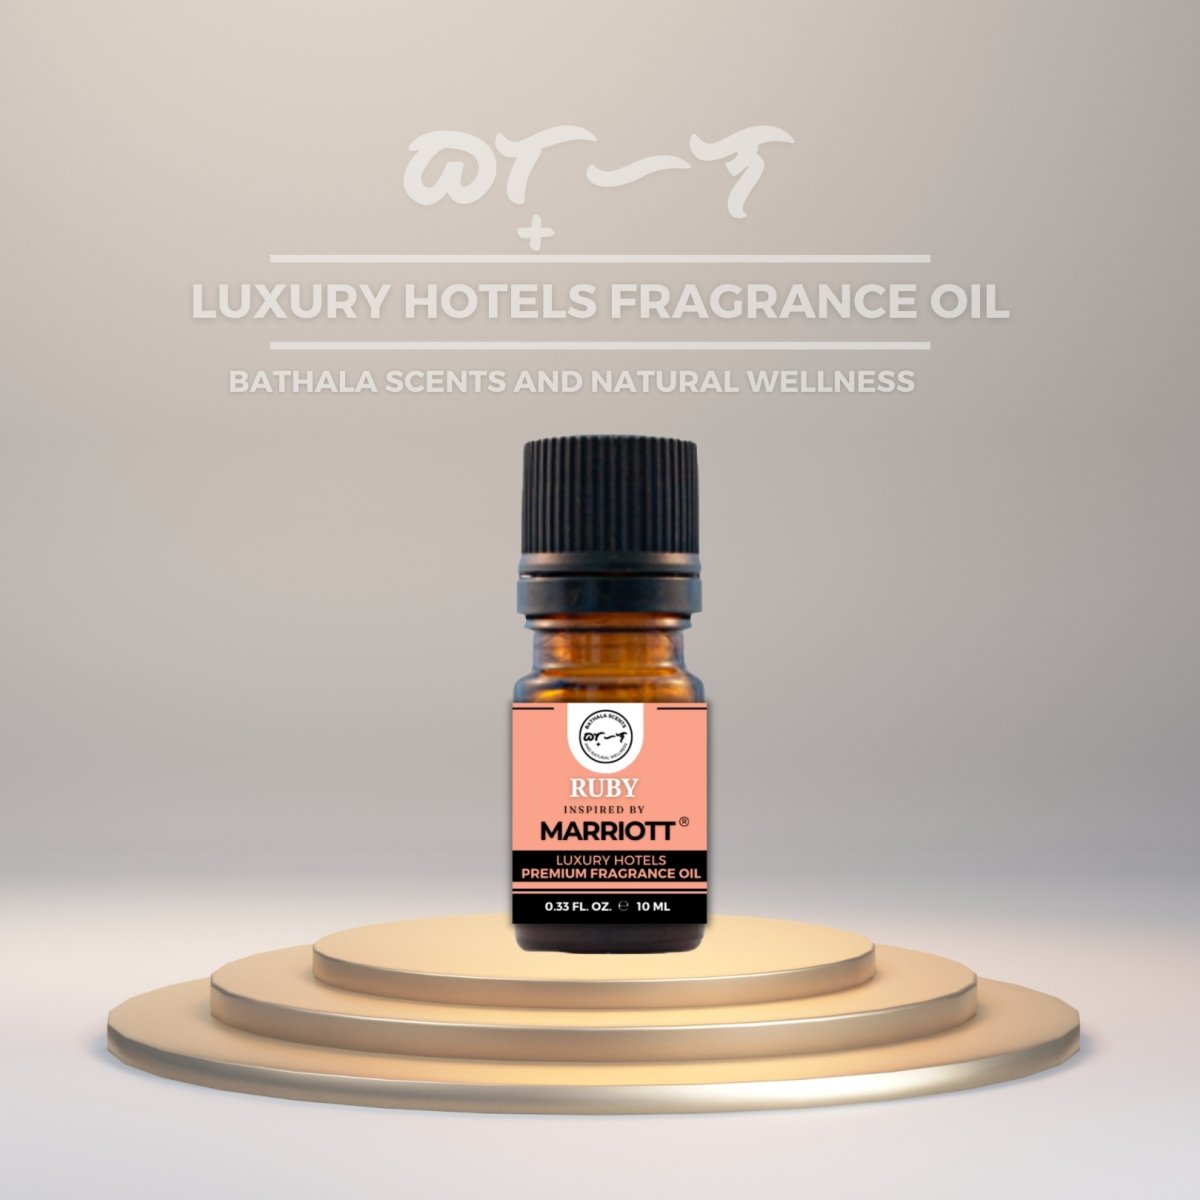 Ruby Inspired by Marriott Luxury Hotels Fragrance Oil 10ml - Bathala Scents and Natural Wellness